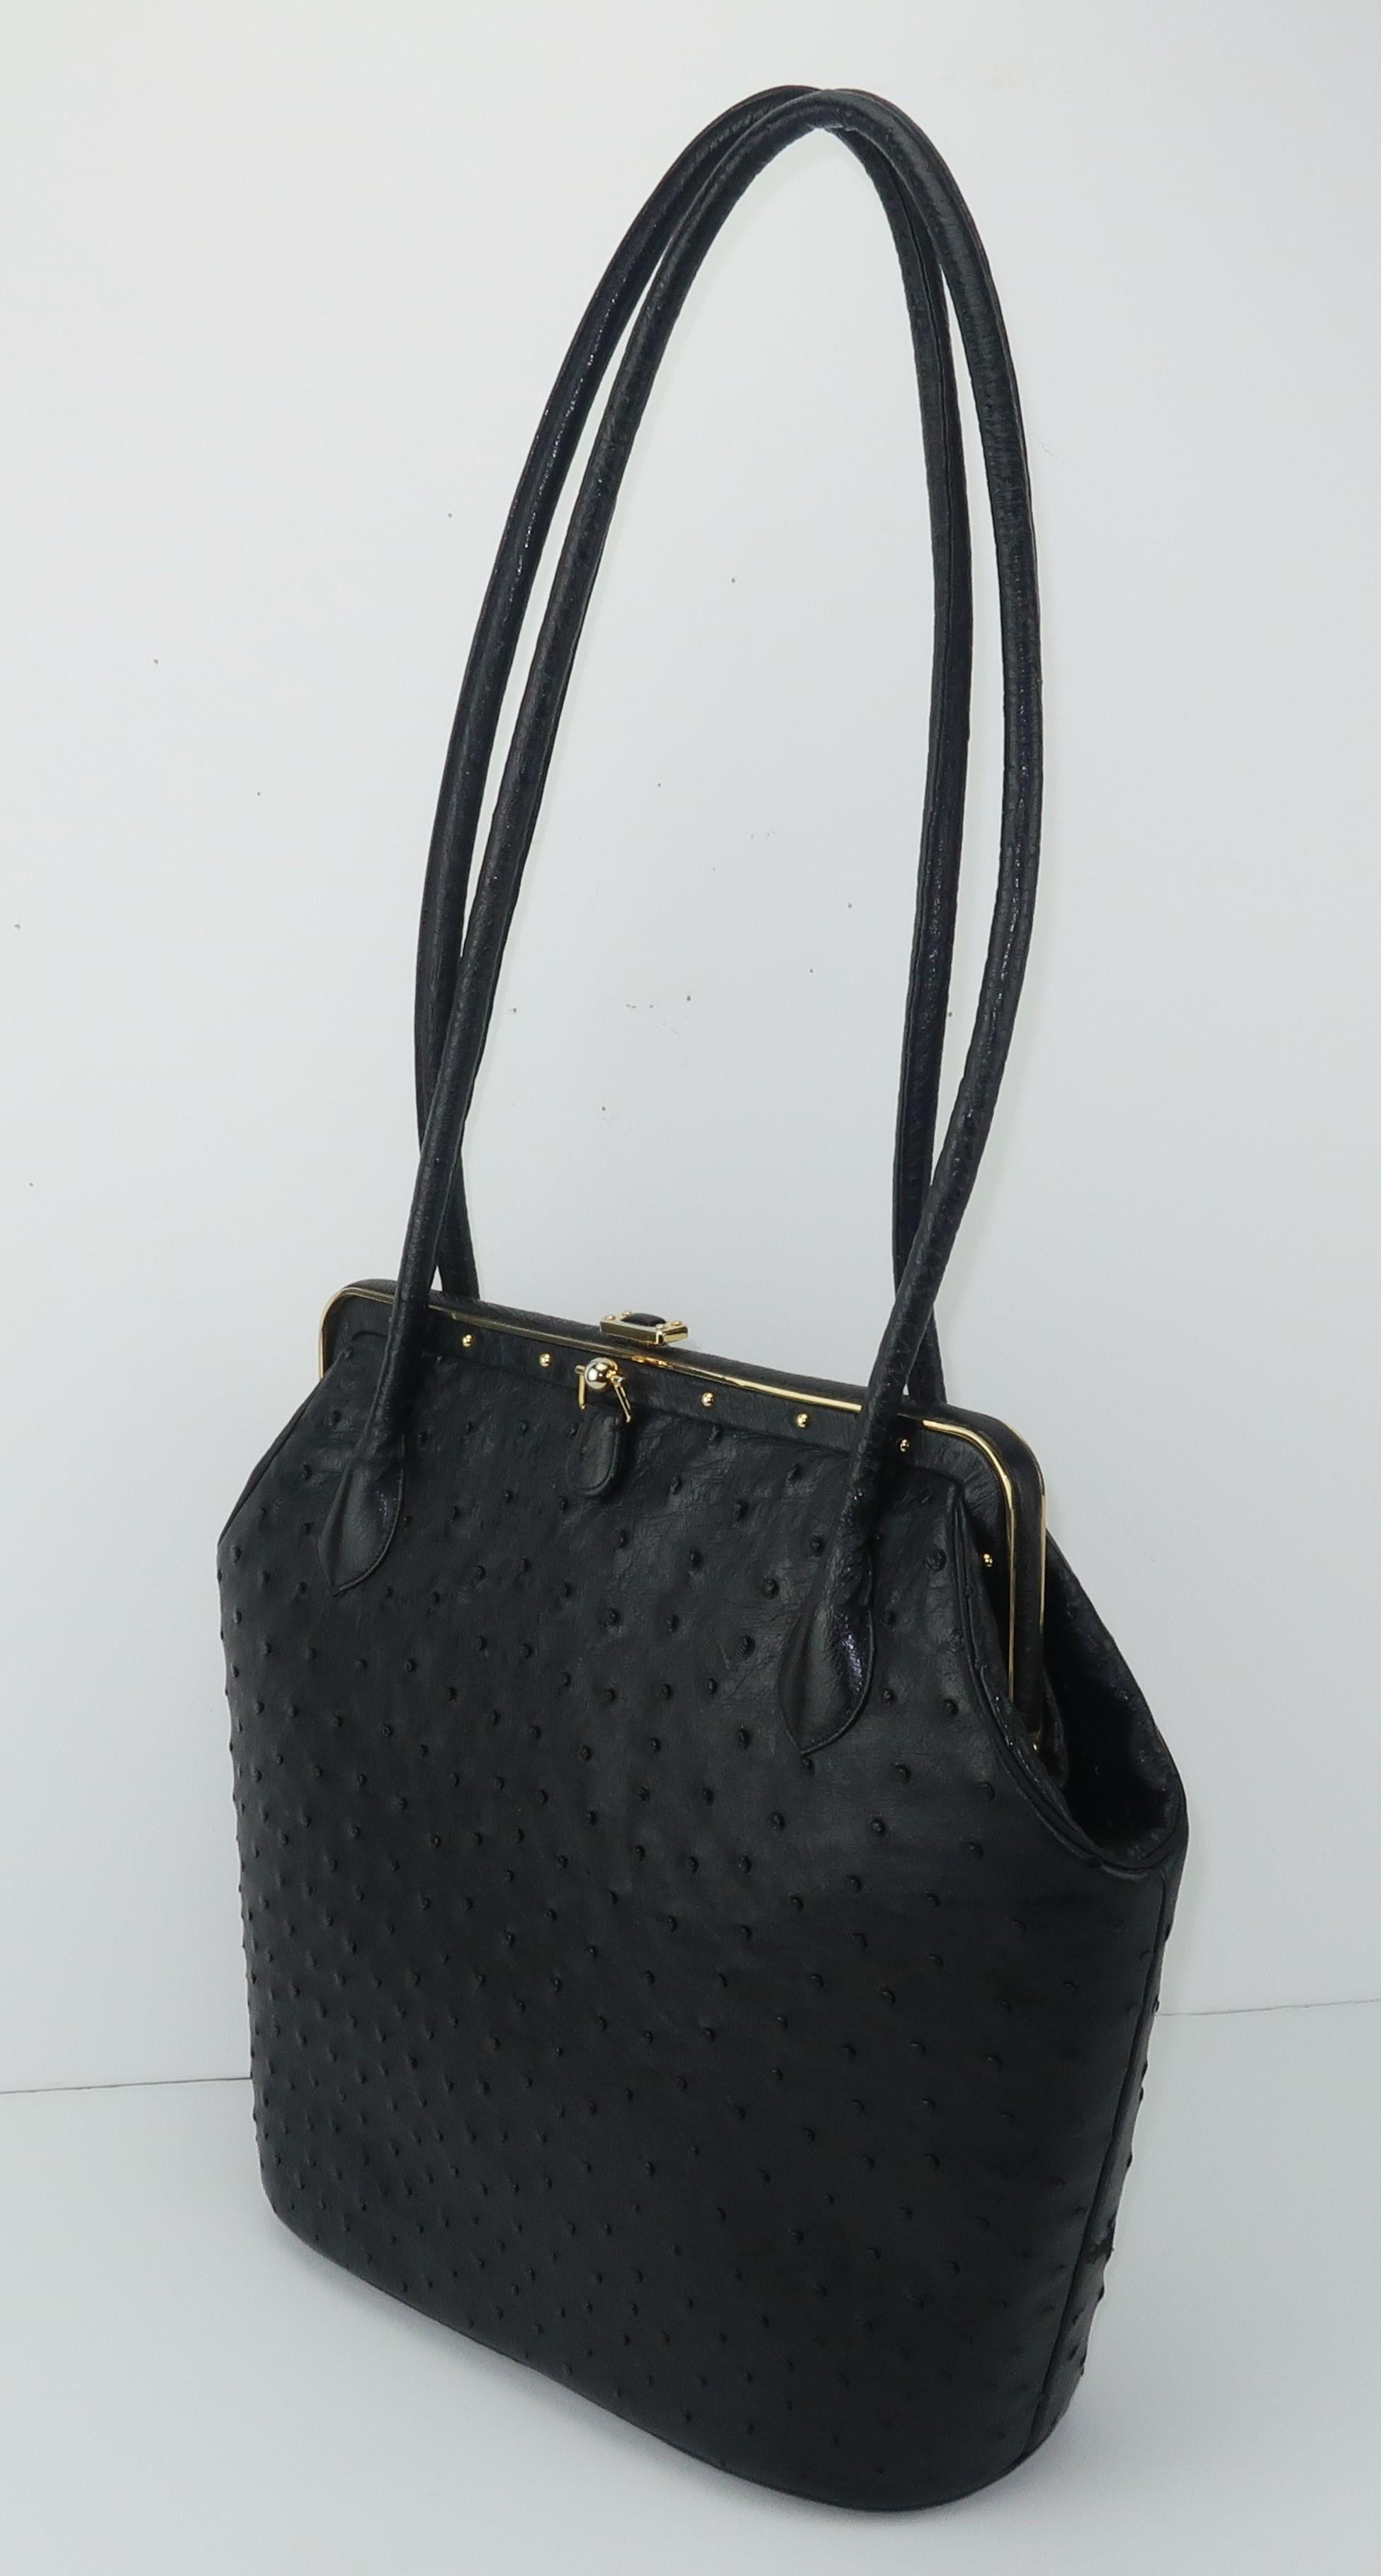 Judith Leiber Large Black Ostrich Leather Handbag With Gold Studs For Sale 6